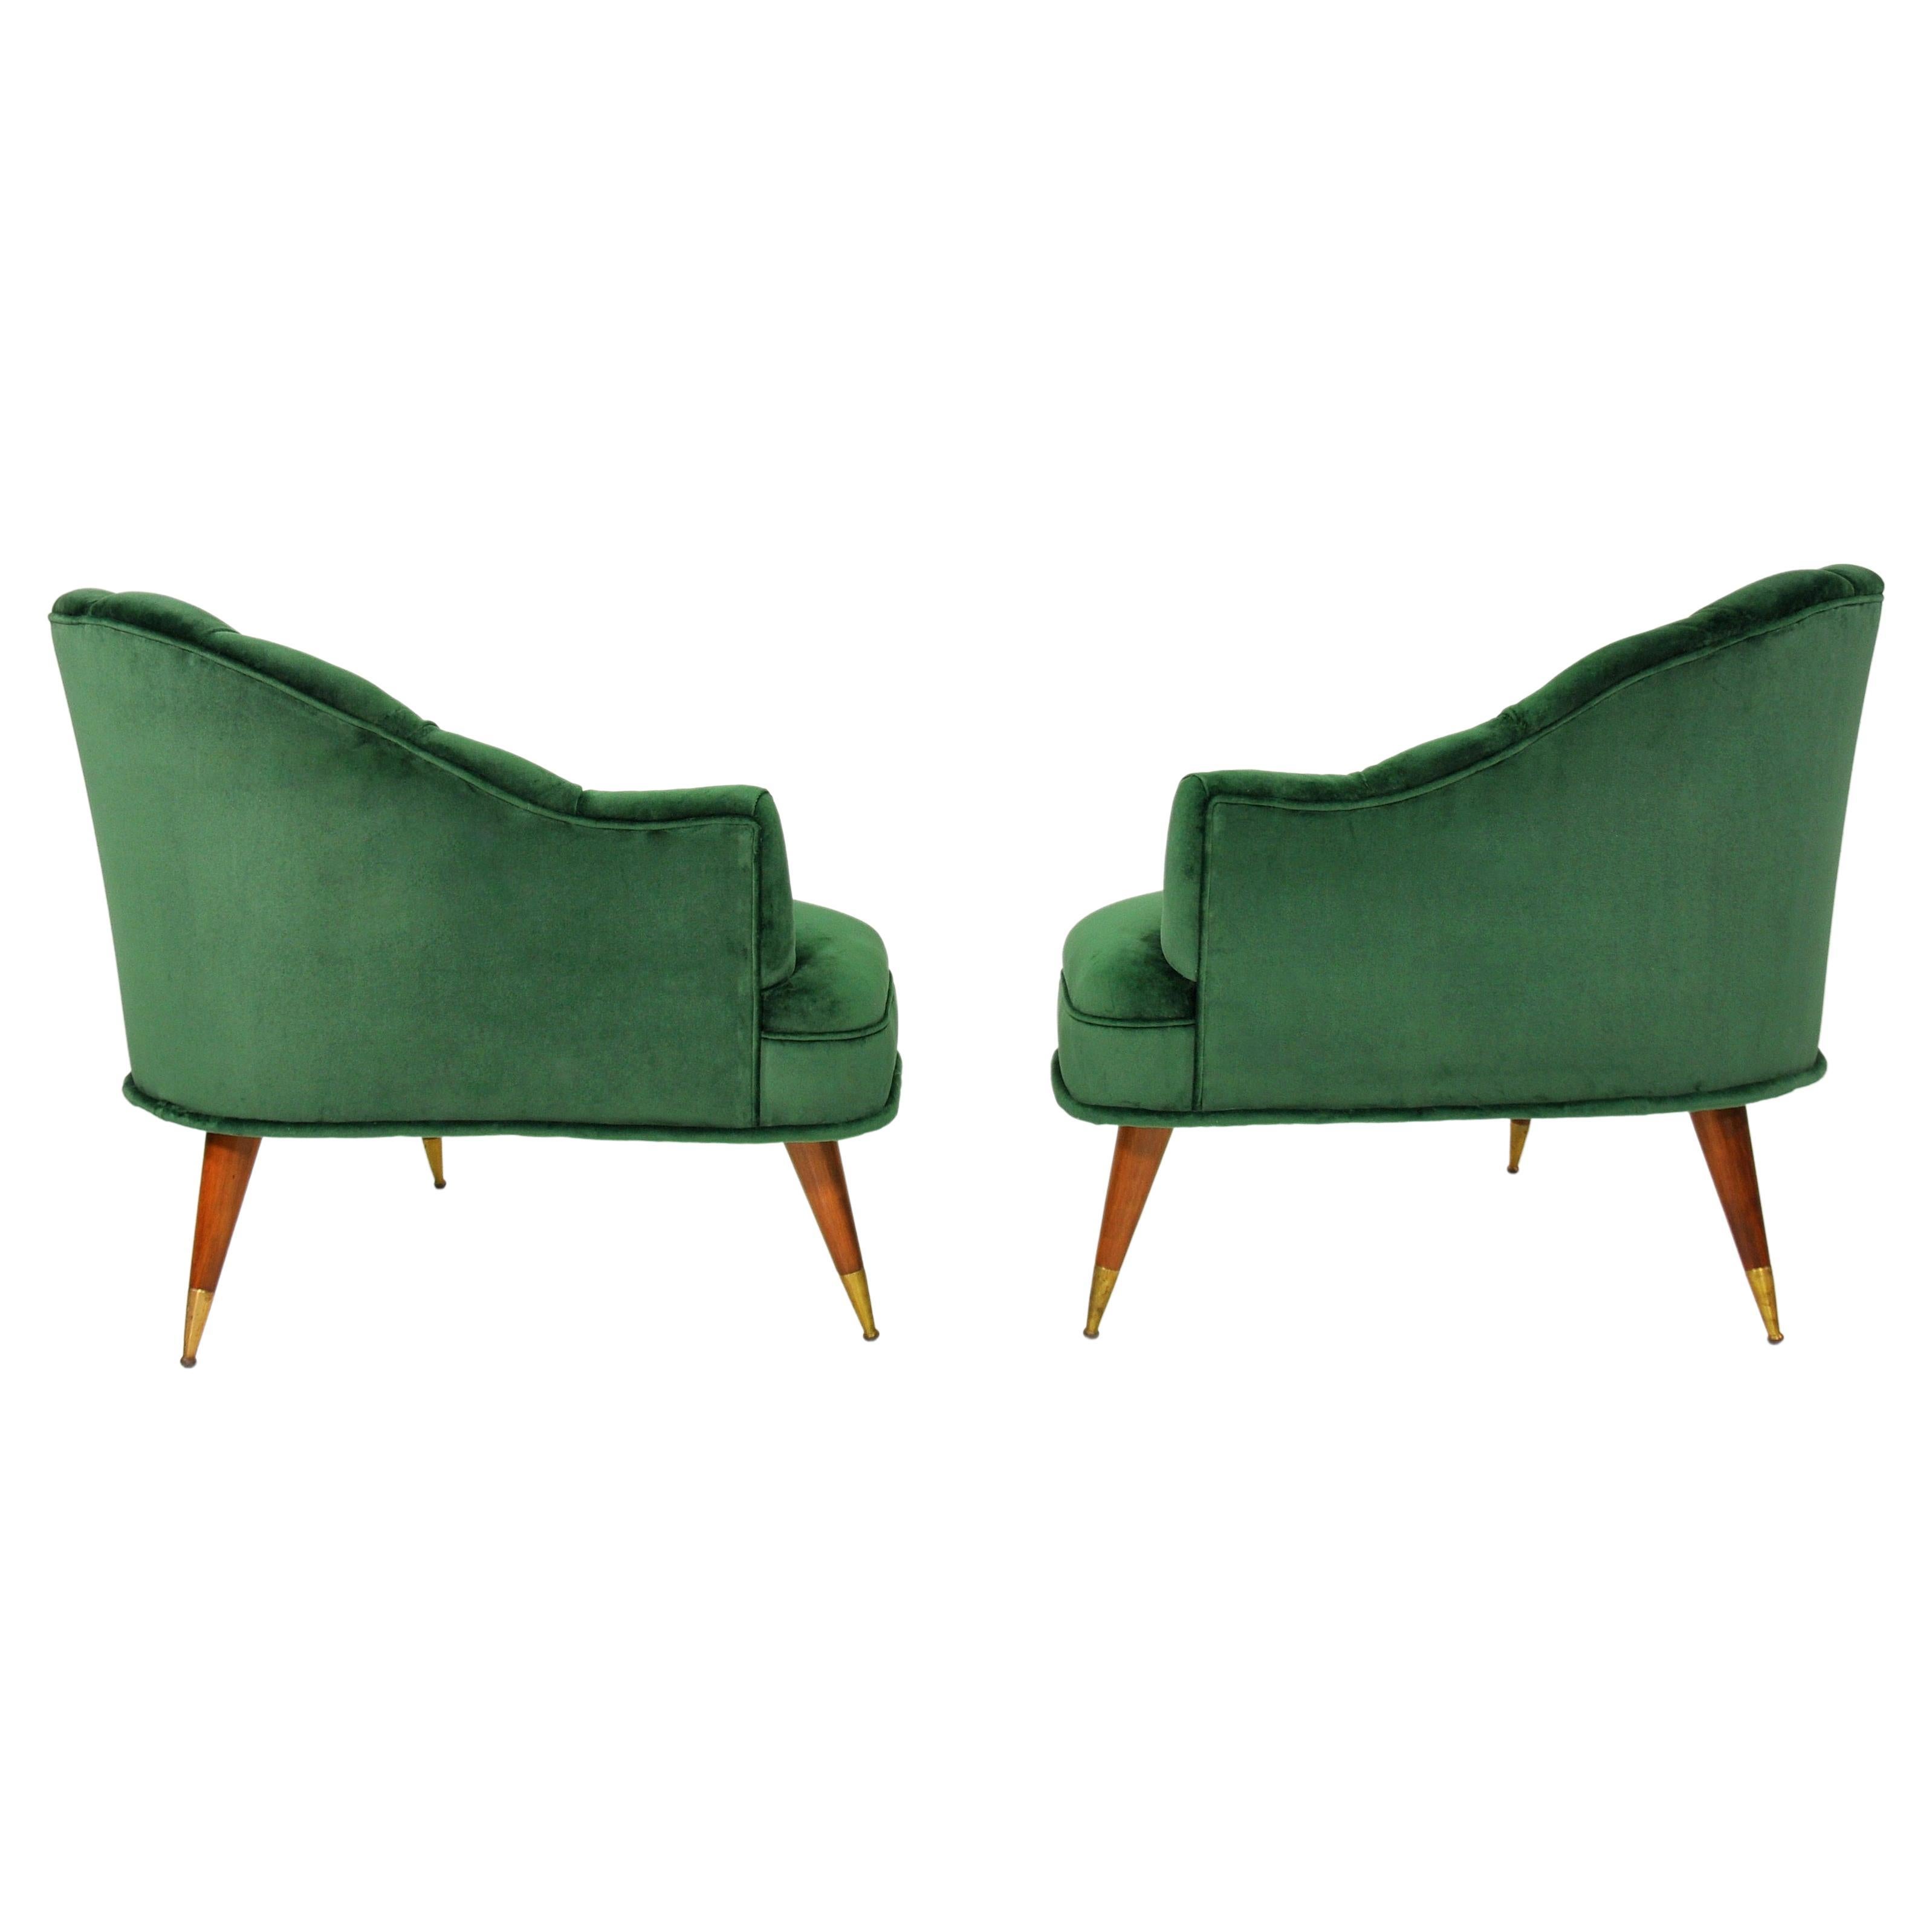 Hollywood Regency Mid-Century Modern Channel Back Lounge Chairs - Pair For Sale 3